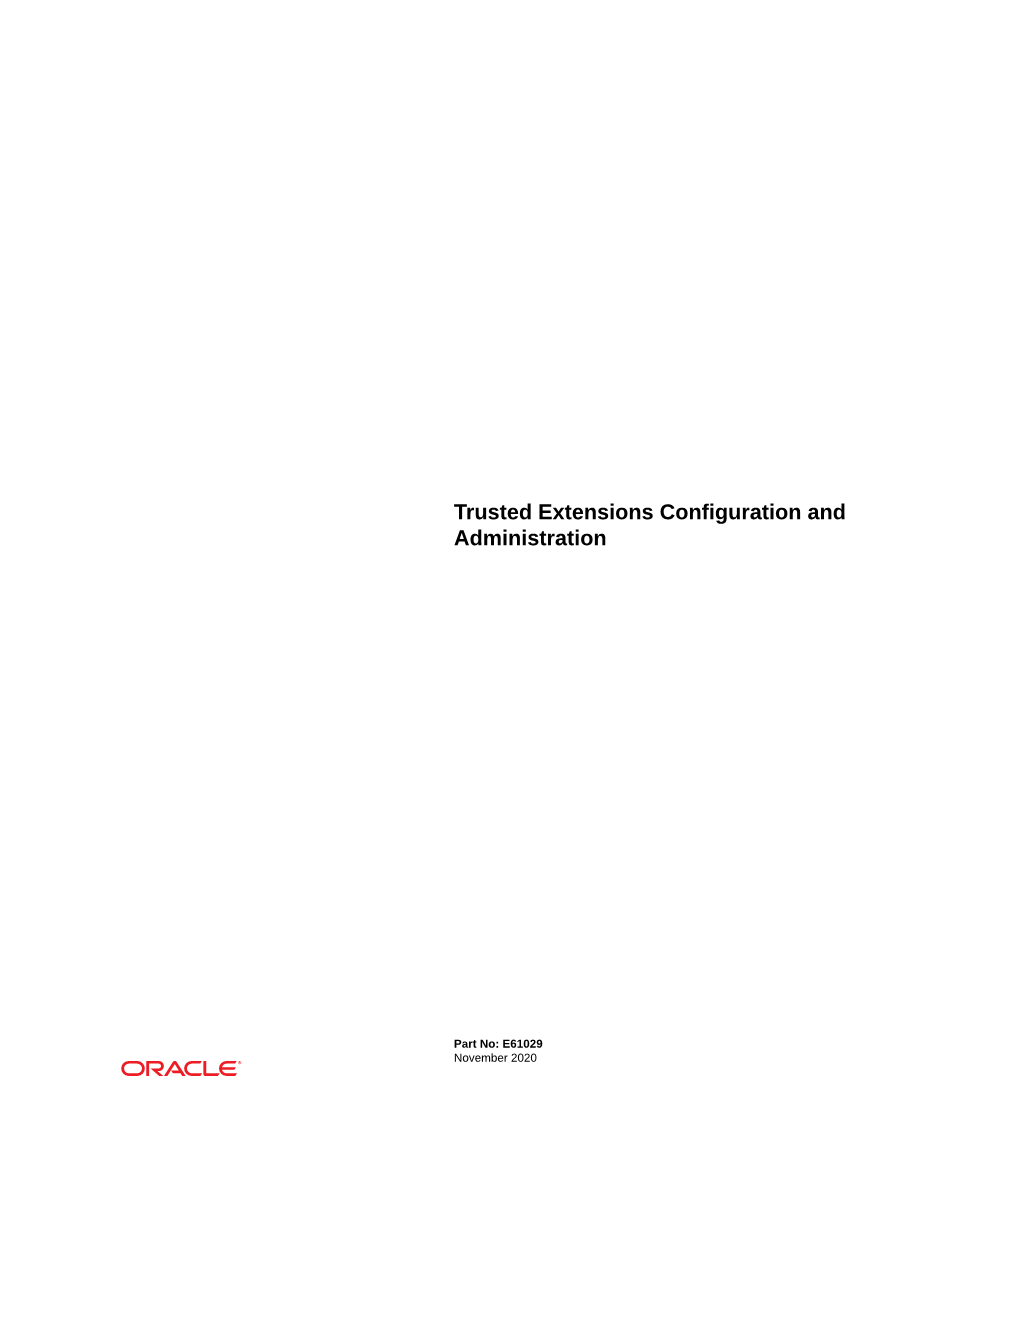 Trusted Extensions Configuration and Administration